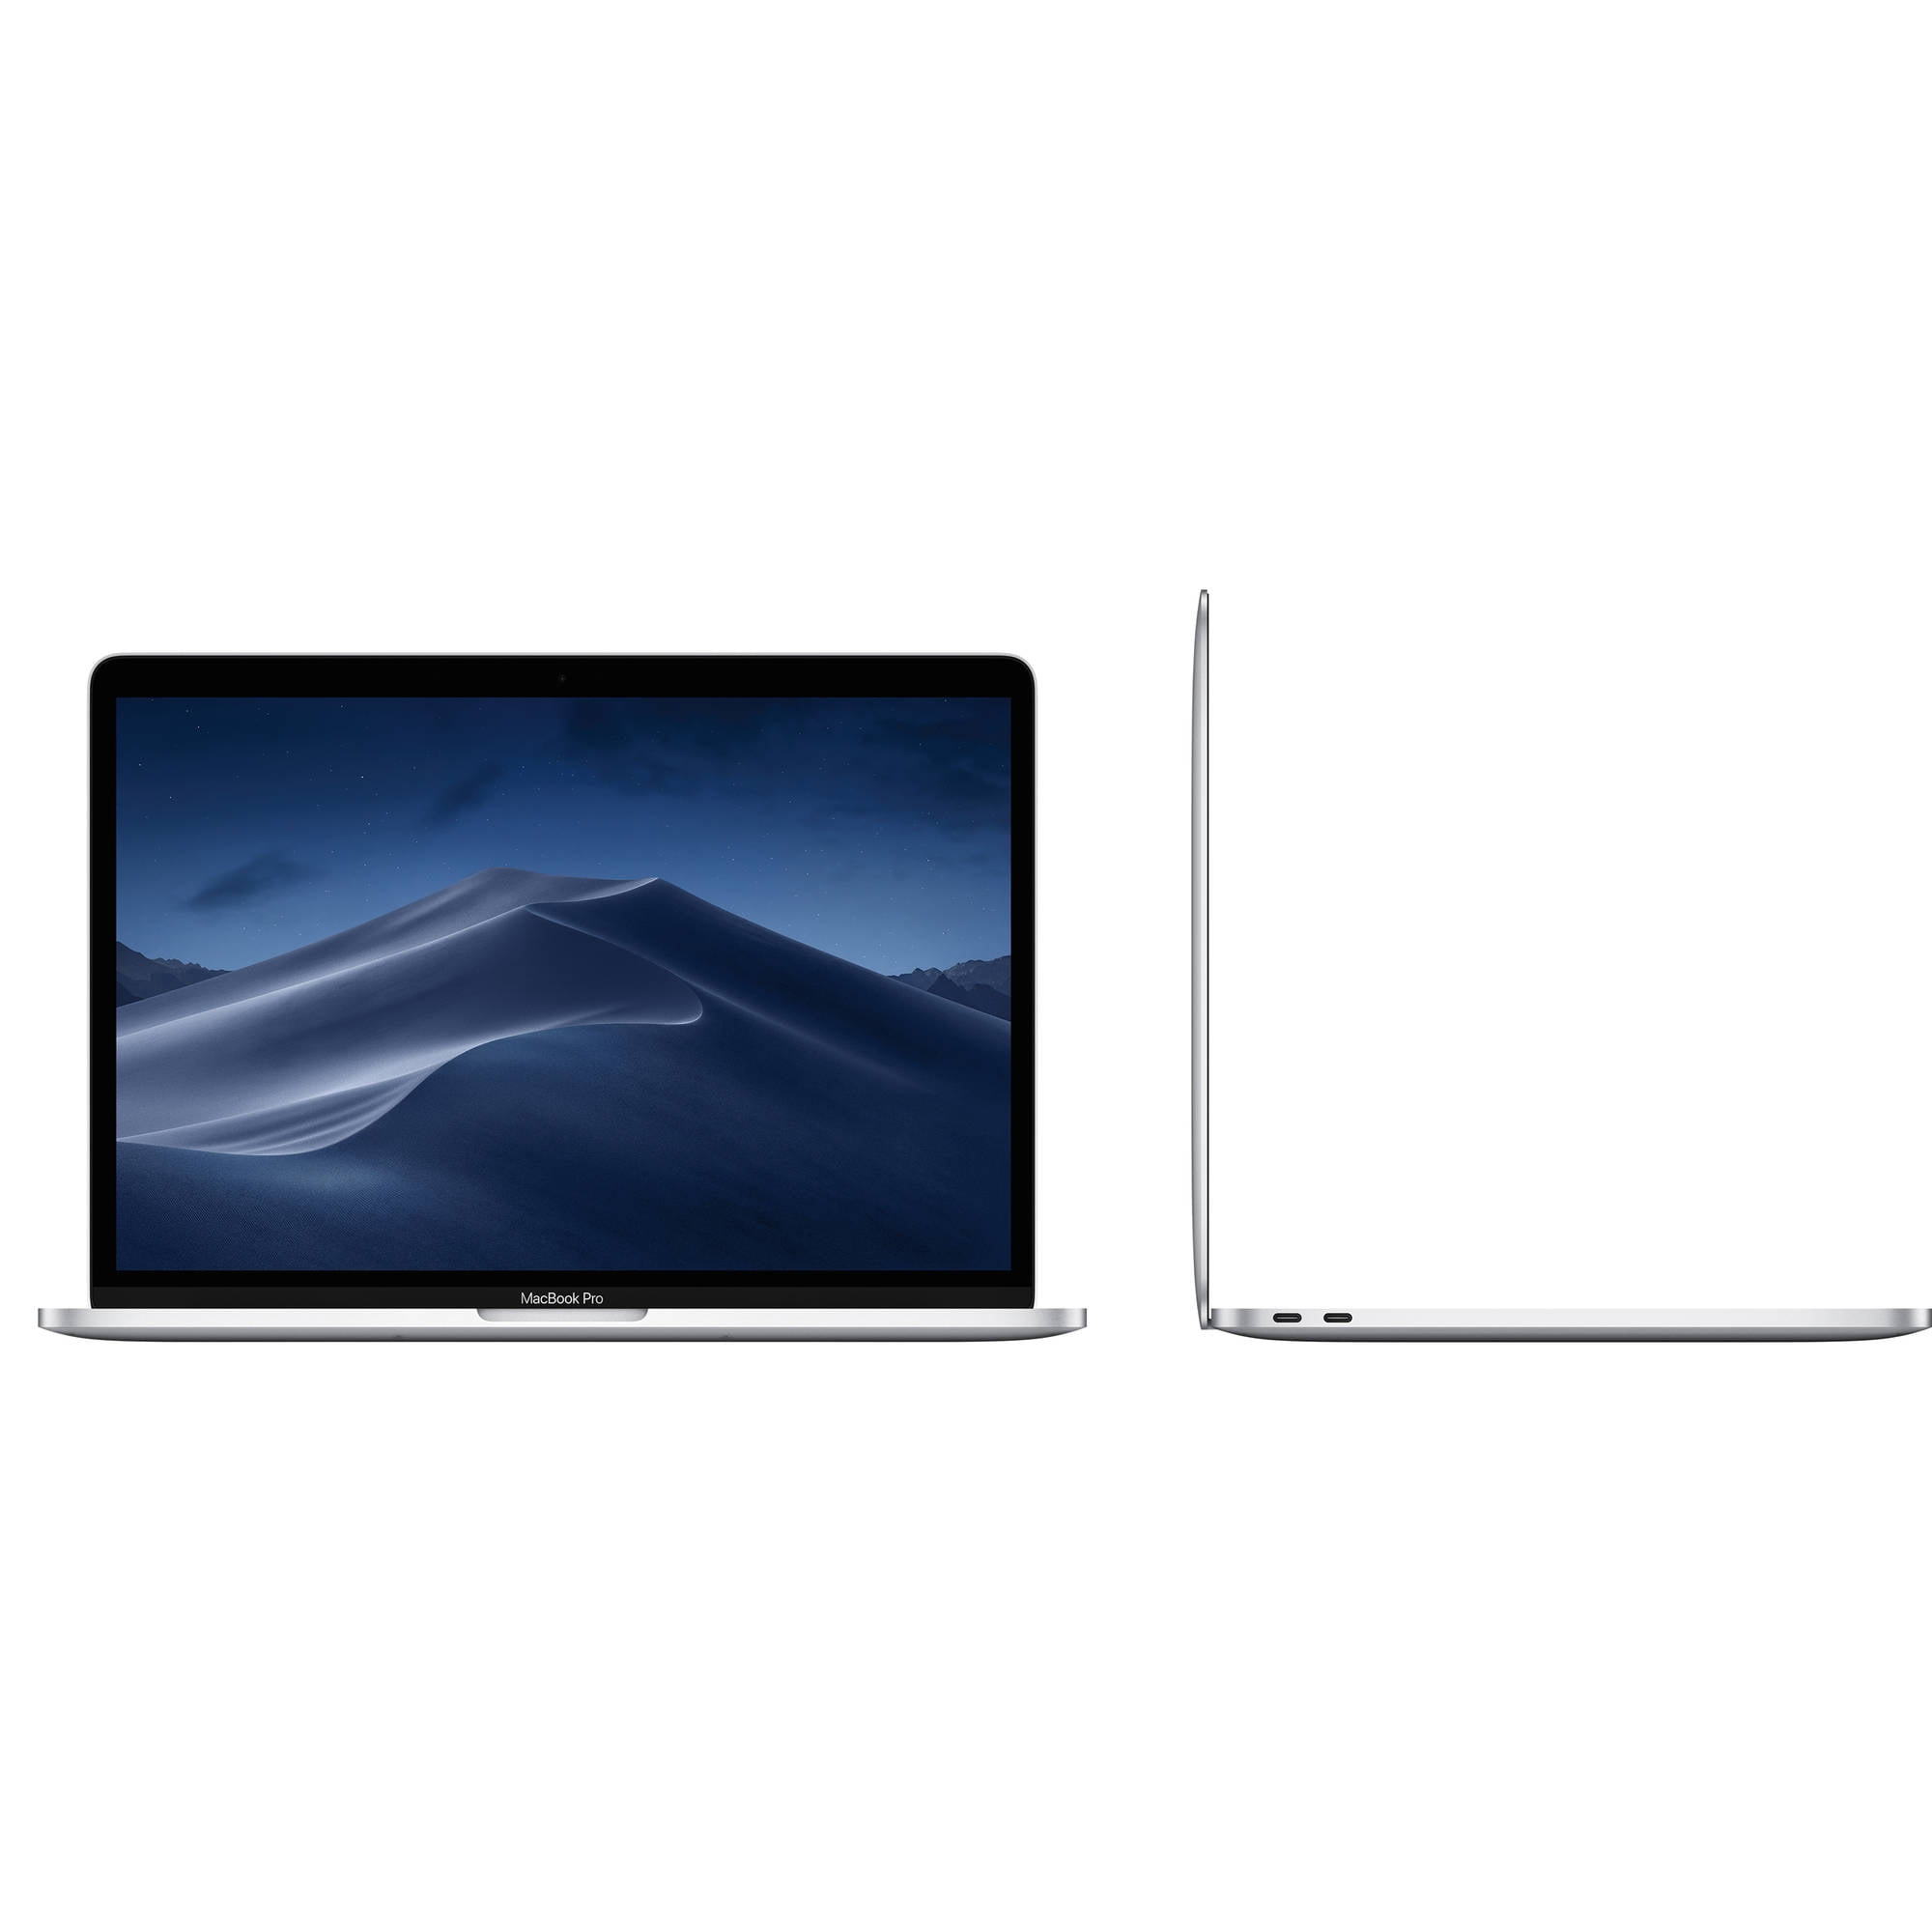 13-inch MacBook Pro with Touch Bar: 2.4GHz quad-core 8th 